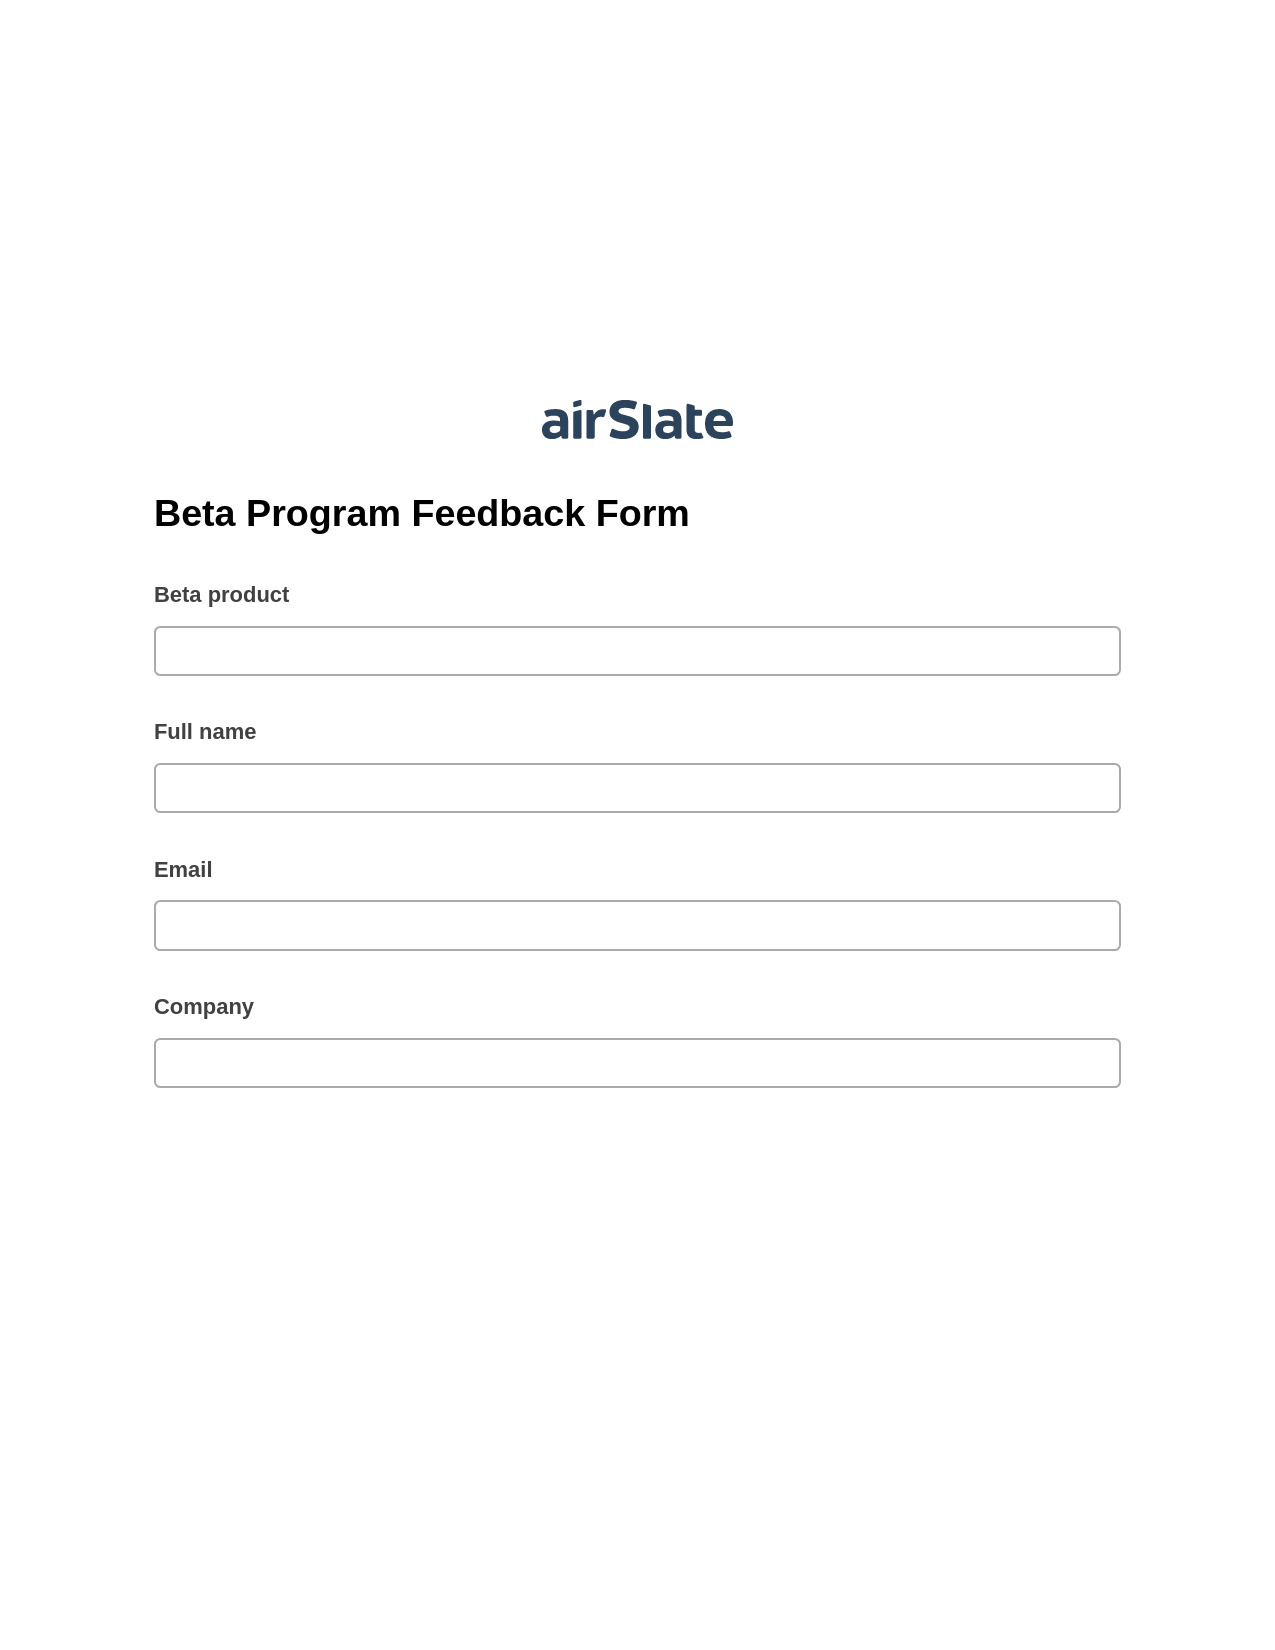 Beta Program Feedback Form Pre-fill Dropdown from Airtable, Add Tags to Slate Bot, OneDrive Bot